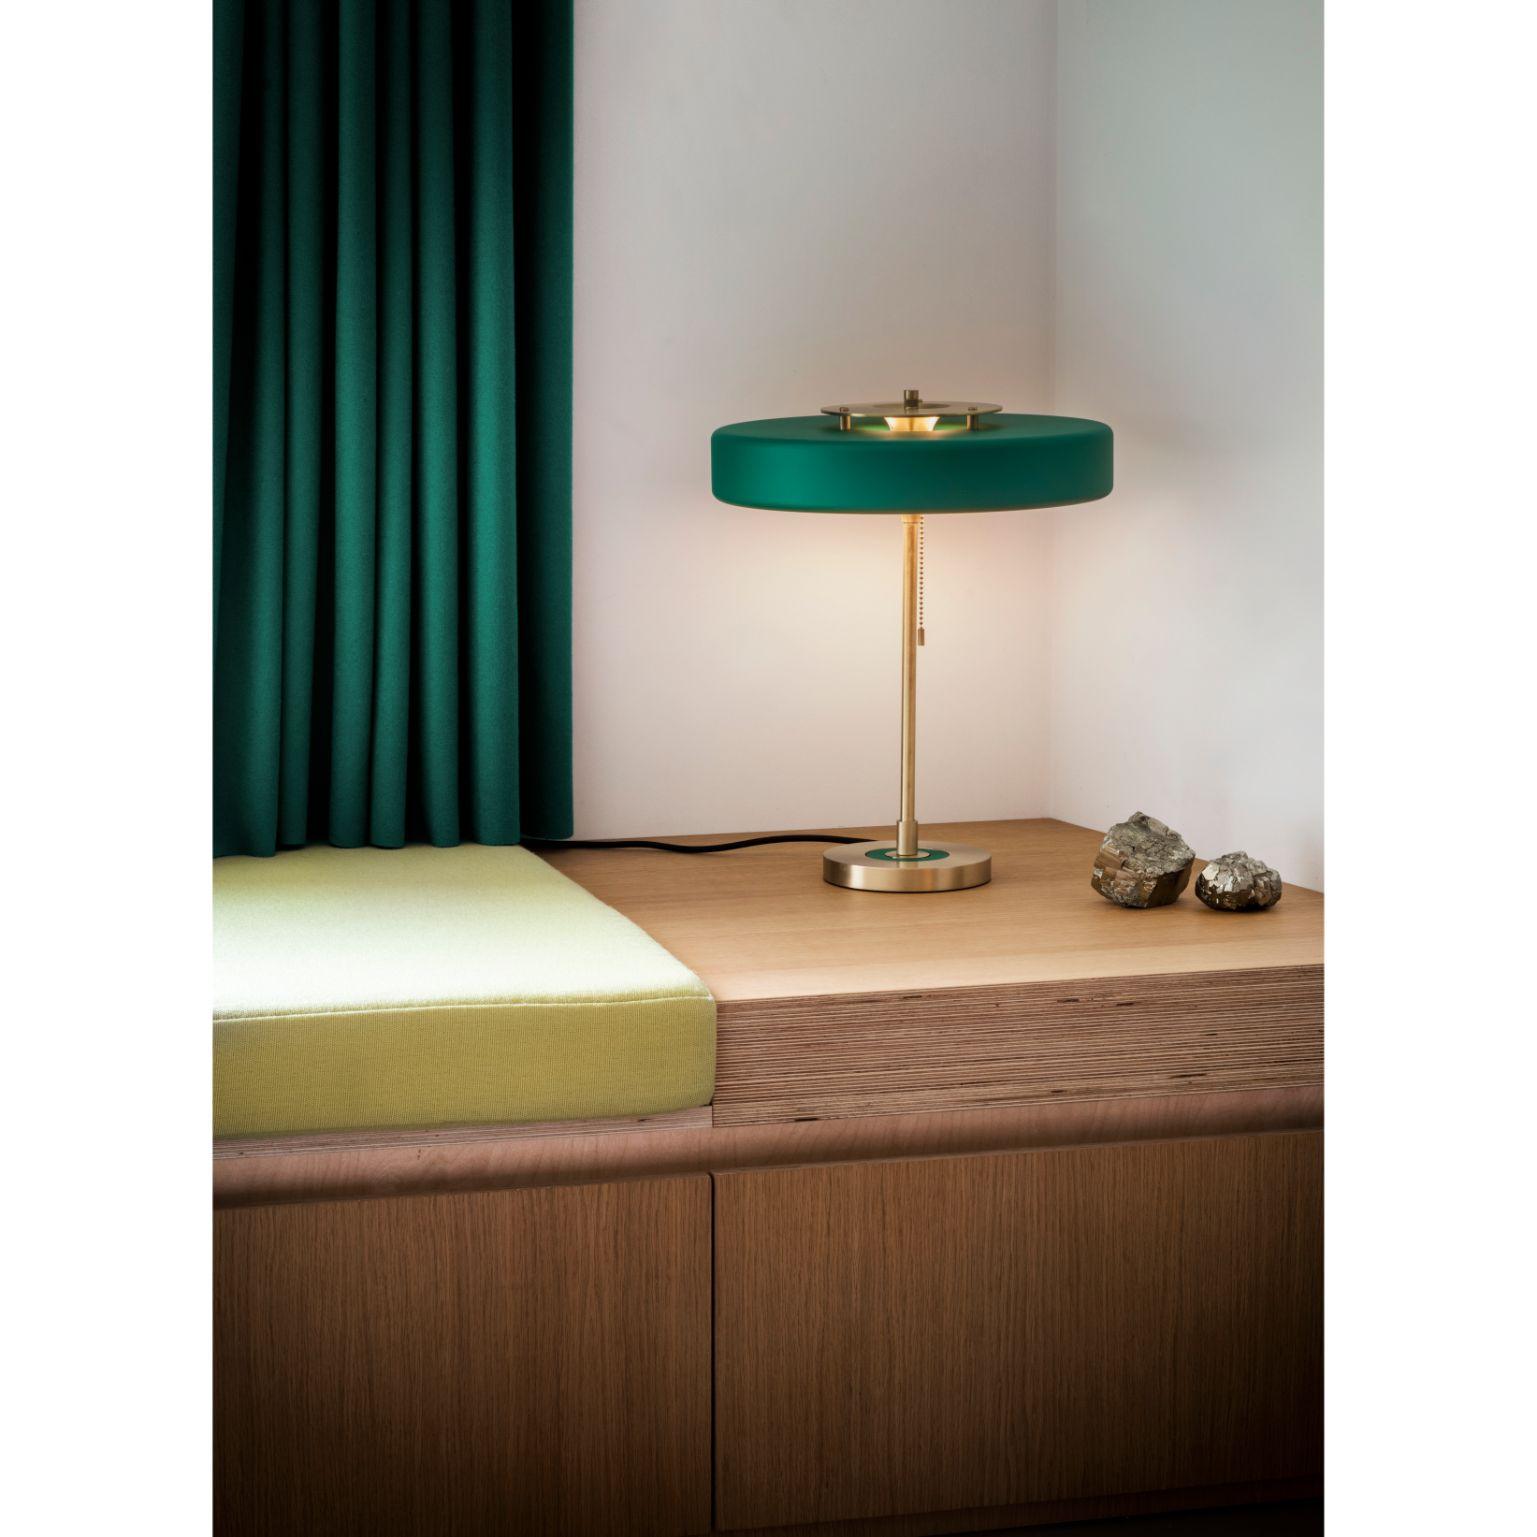 Revolve table lamp - brushed brass - green by Bert Frank
Dimensions: 42 x 35 x 15 cm
Materials: Brass, Steel

Also Available in polished brass

When Adam Yeats and Robbie Llewellyn founded Bert Frank in 2013 it was a meeting of minds and the start